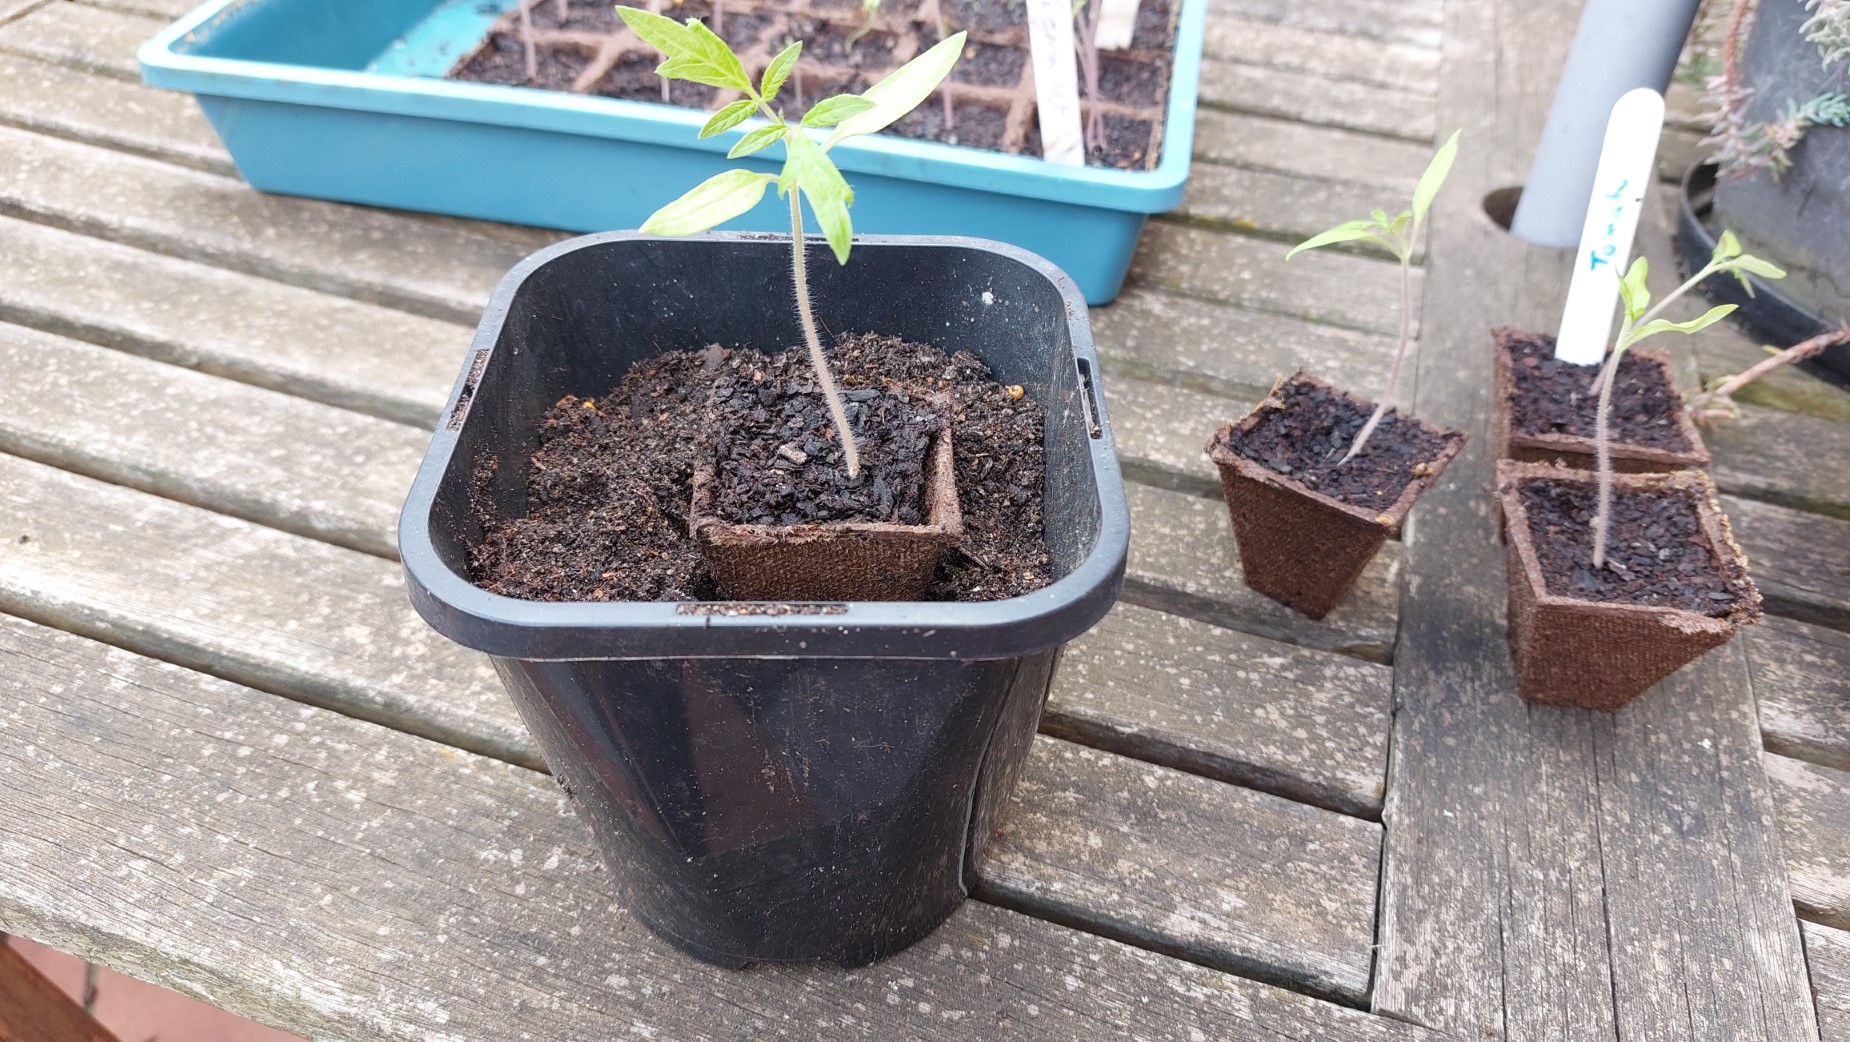 Replanting chillies into individual pots